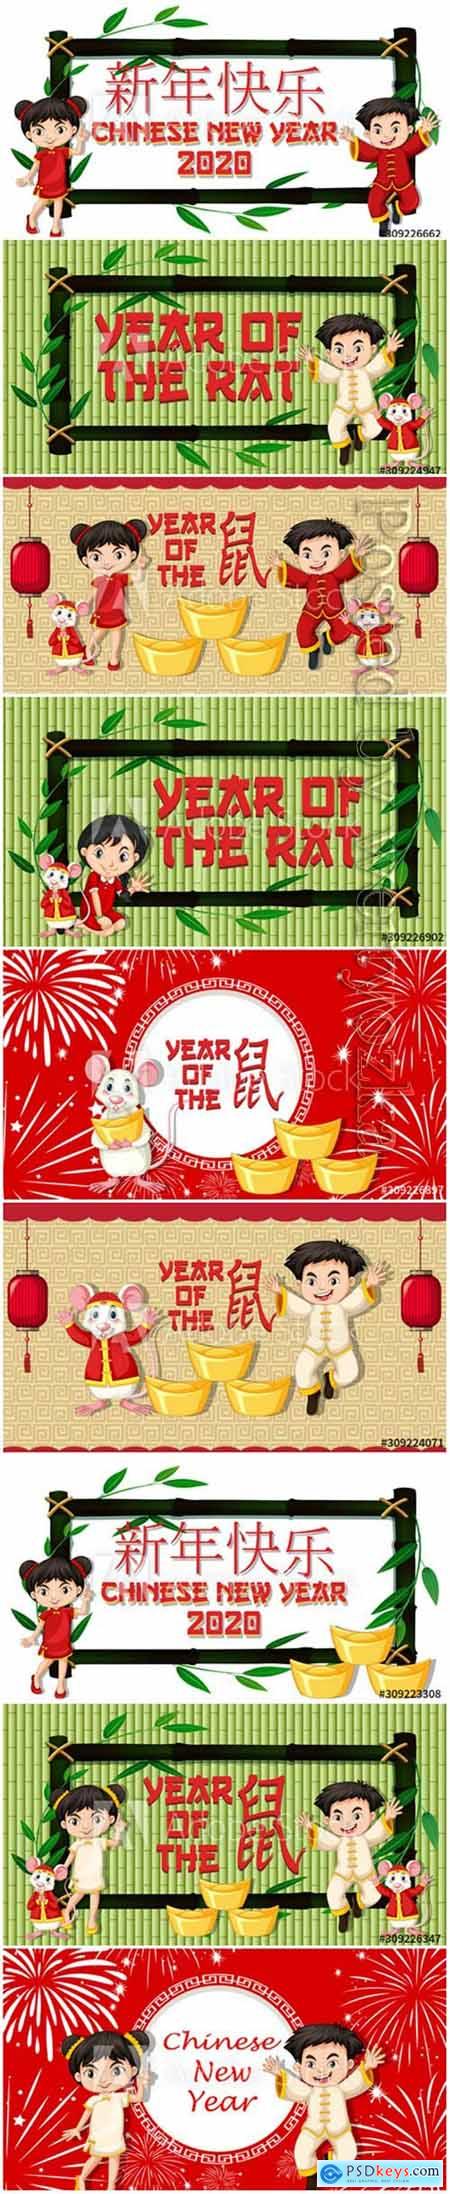 New Year card template with chinese kids and rats